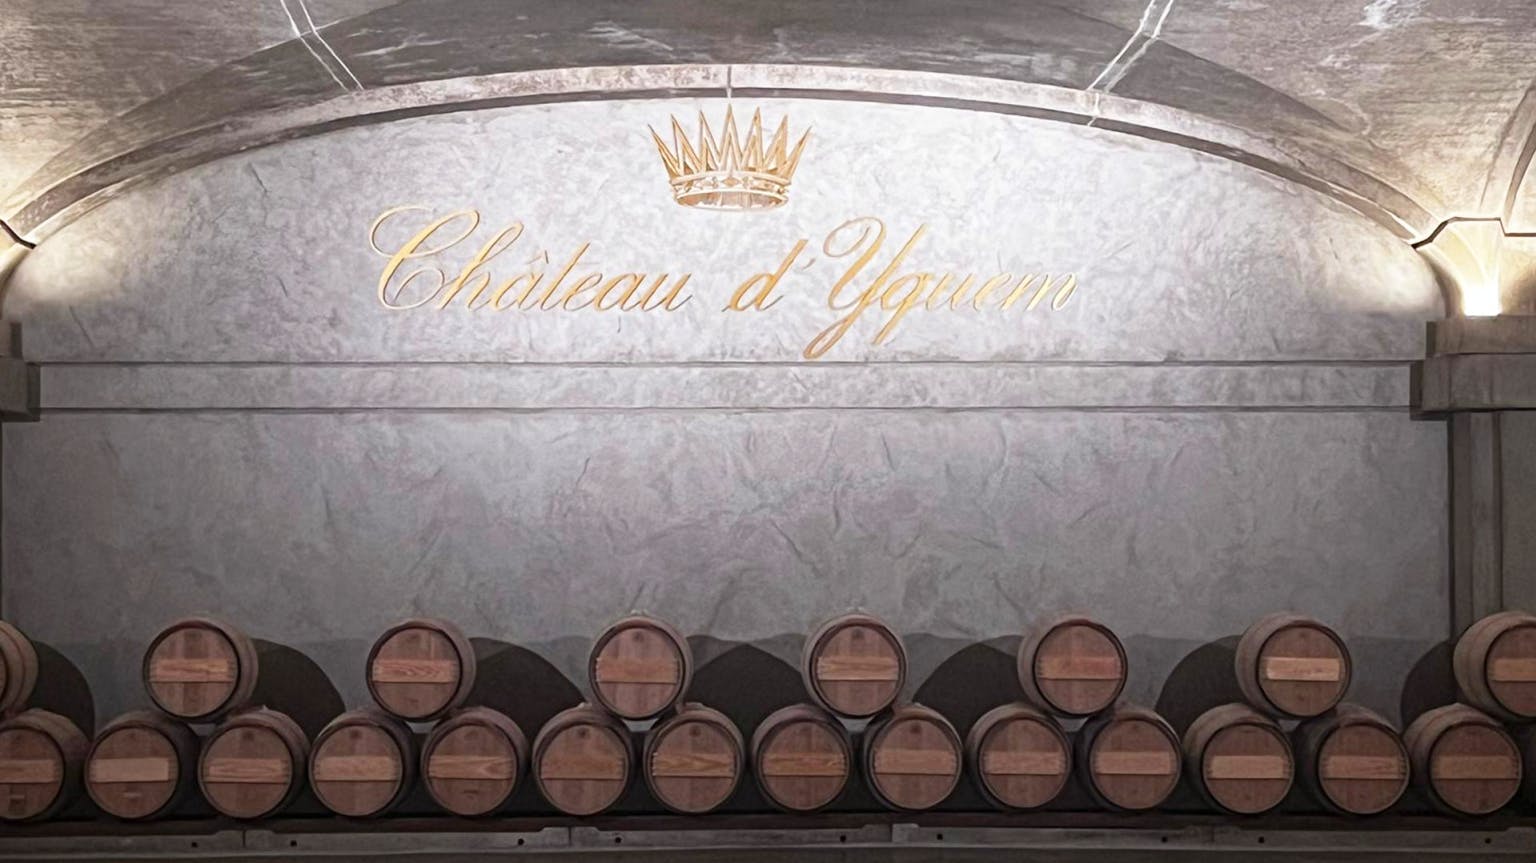 Exploring Ch. D’Yquem and Cheval Blanc 16:9